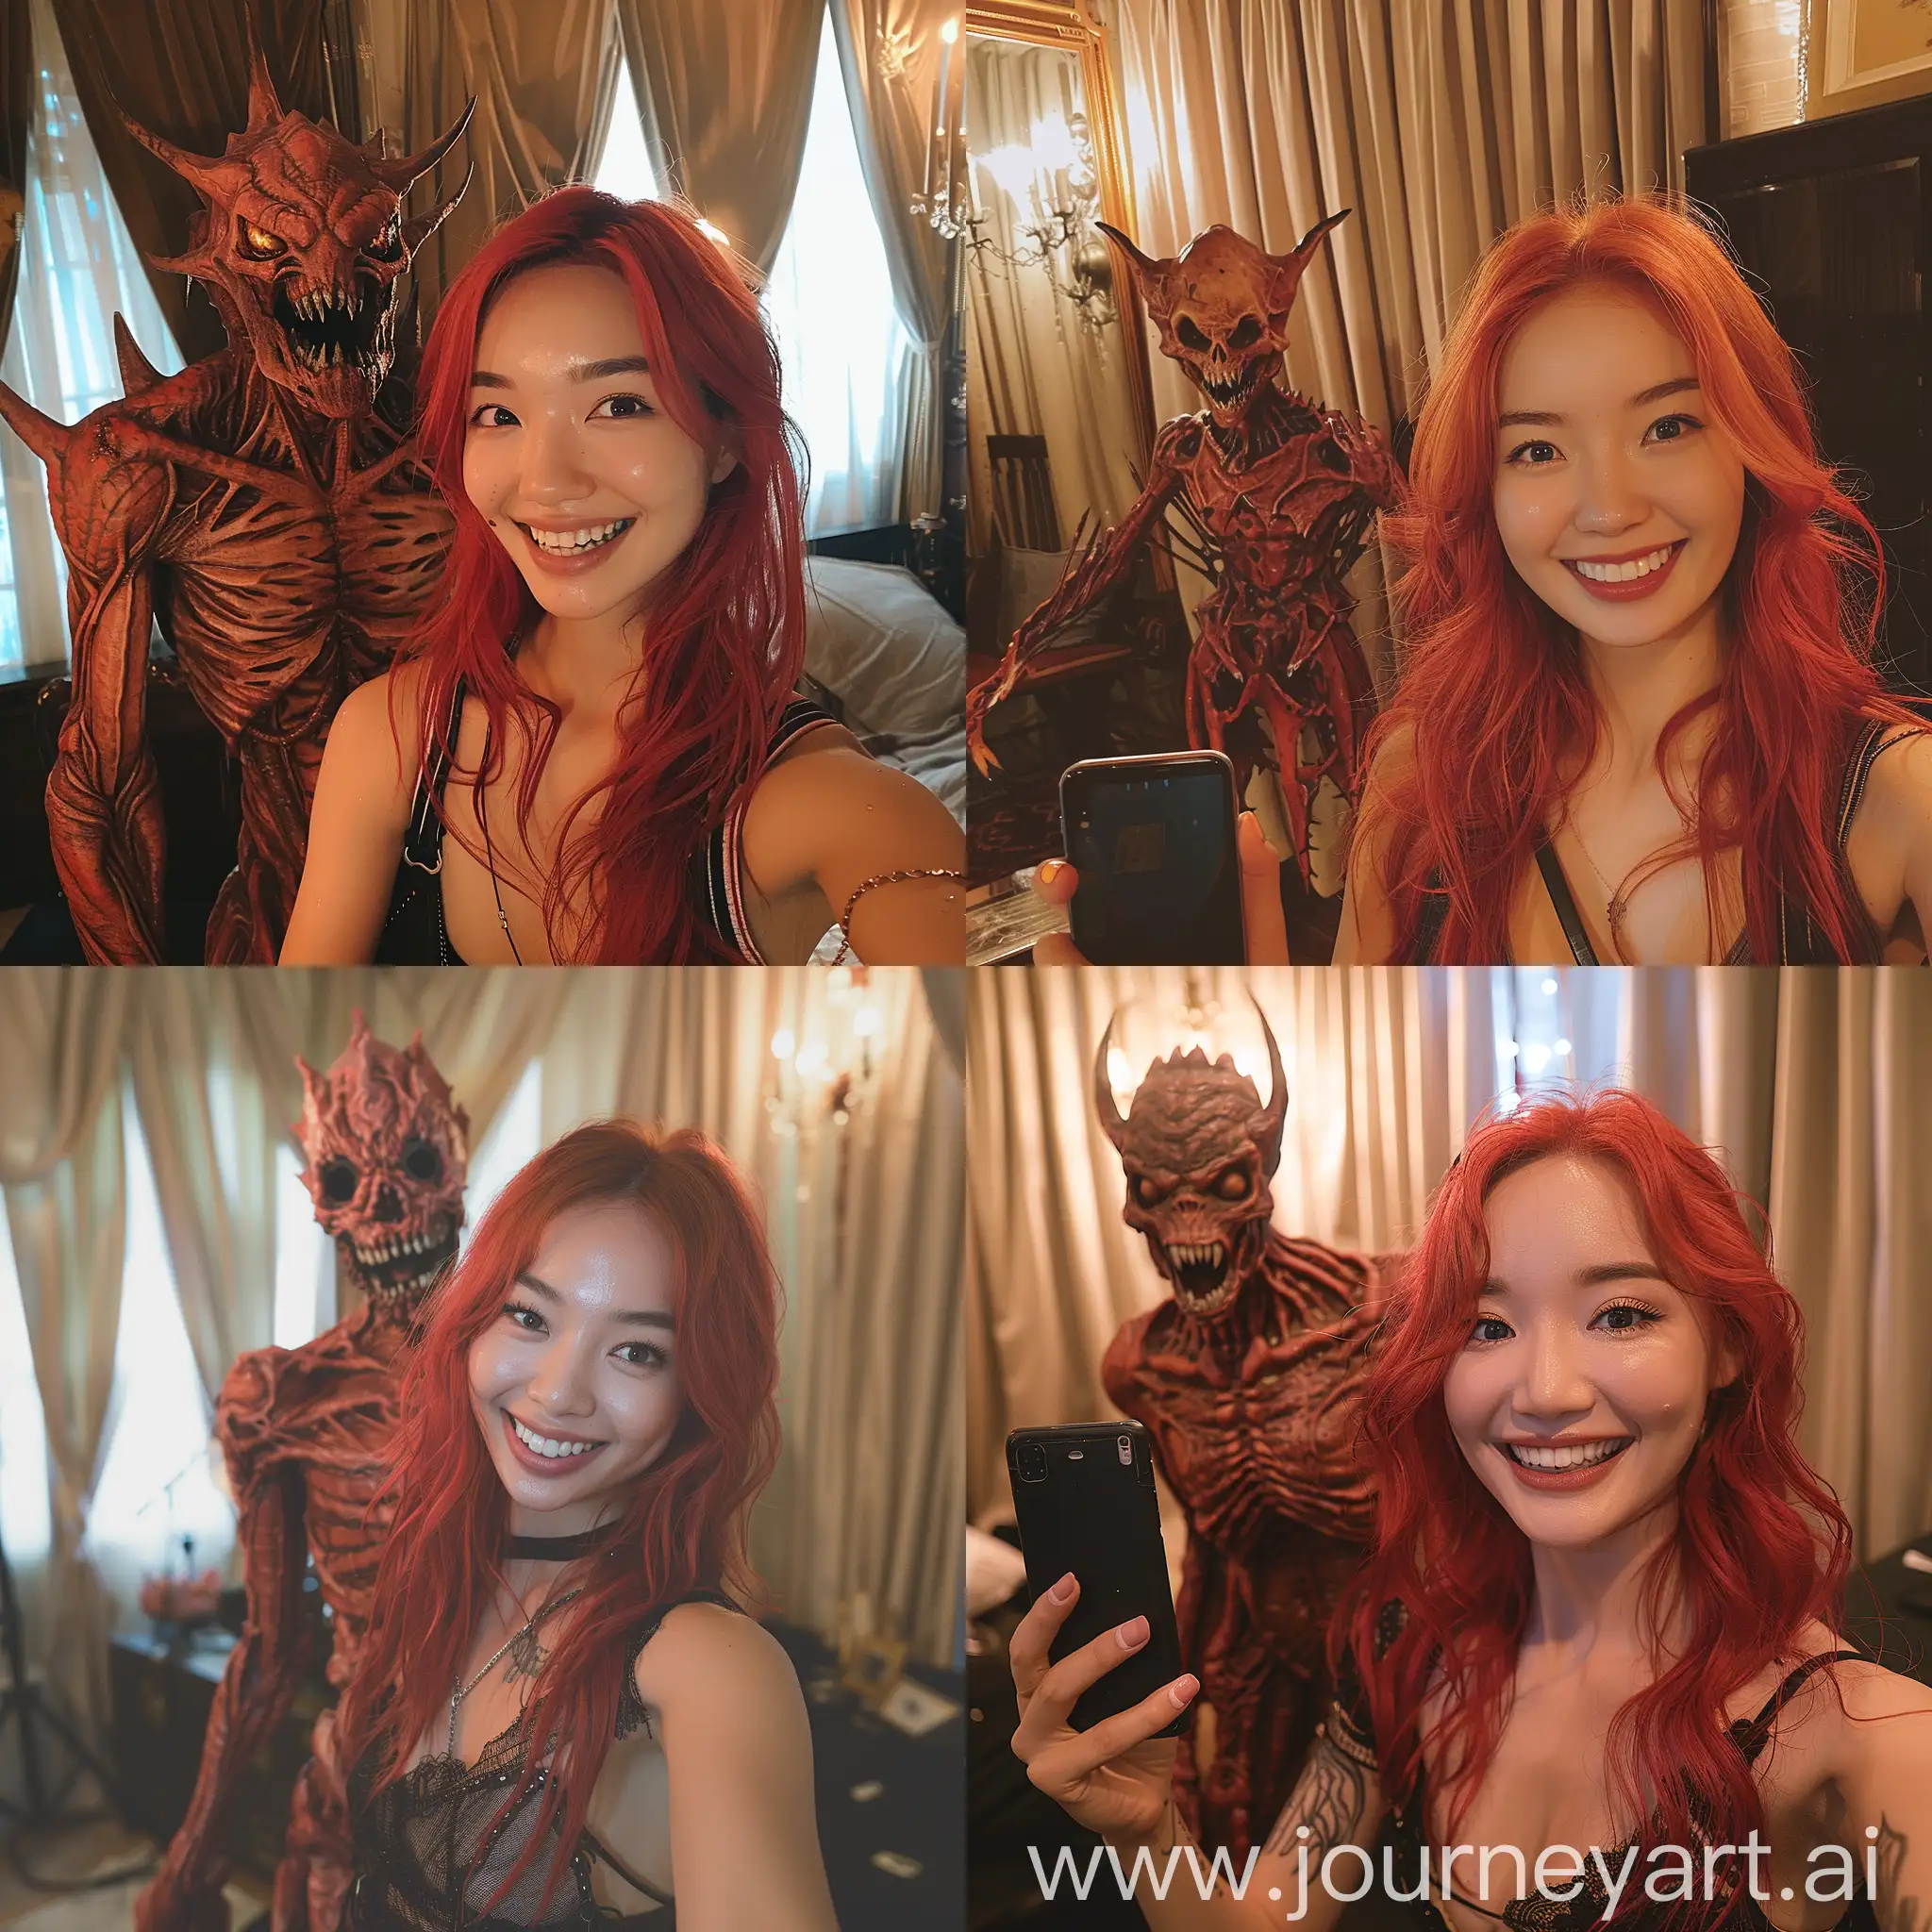 A asian young woman with fiery red hair smiles joyfully in a selfie while a menacing, demonic figure with red, scaly skin and sharp, jagged teeth stands silently behind her in a dimly-lit room with curtains. The overall atmosphere is eerie and unsettling. --ar 1:1 --q 2 --stylize 700